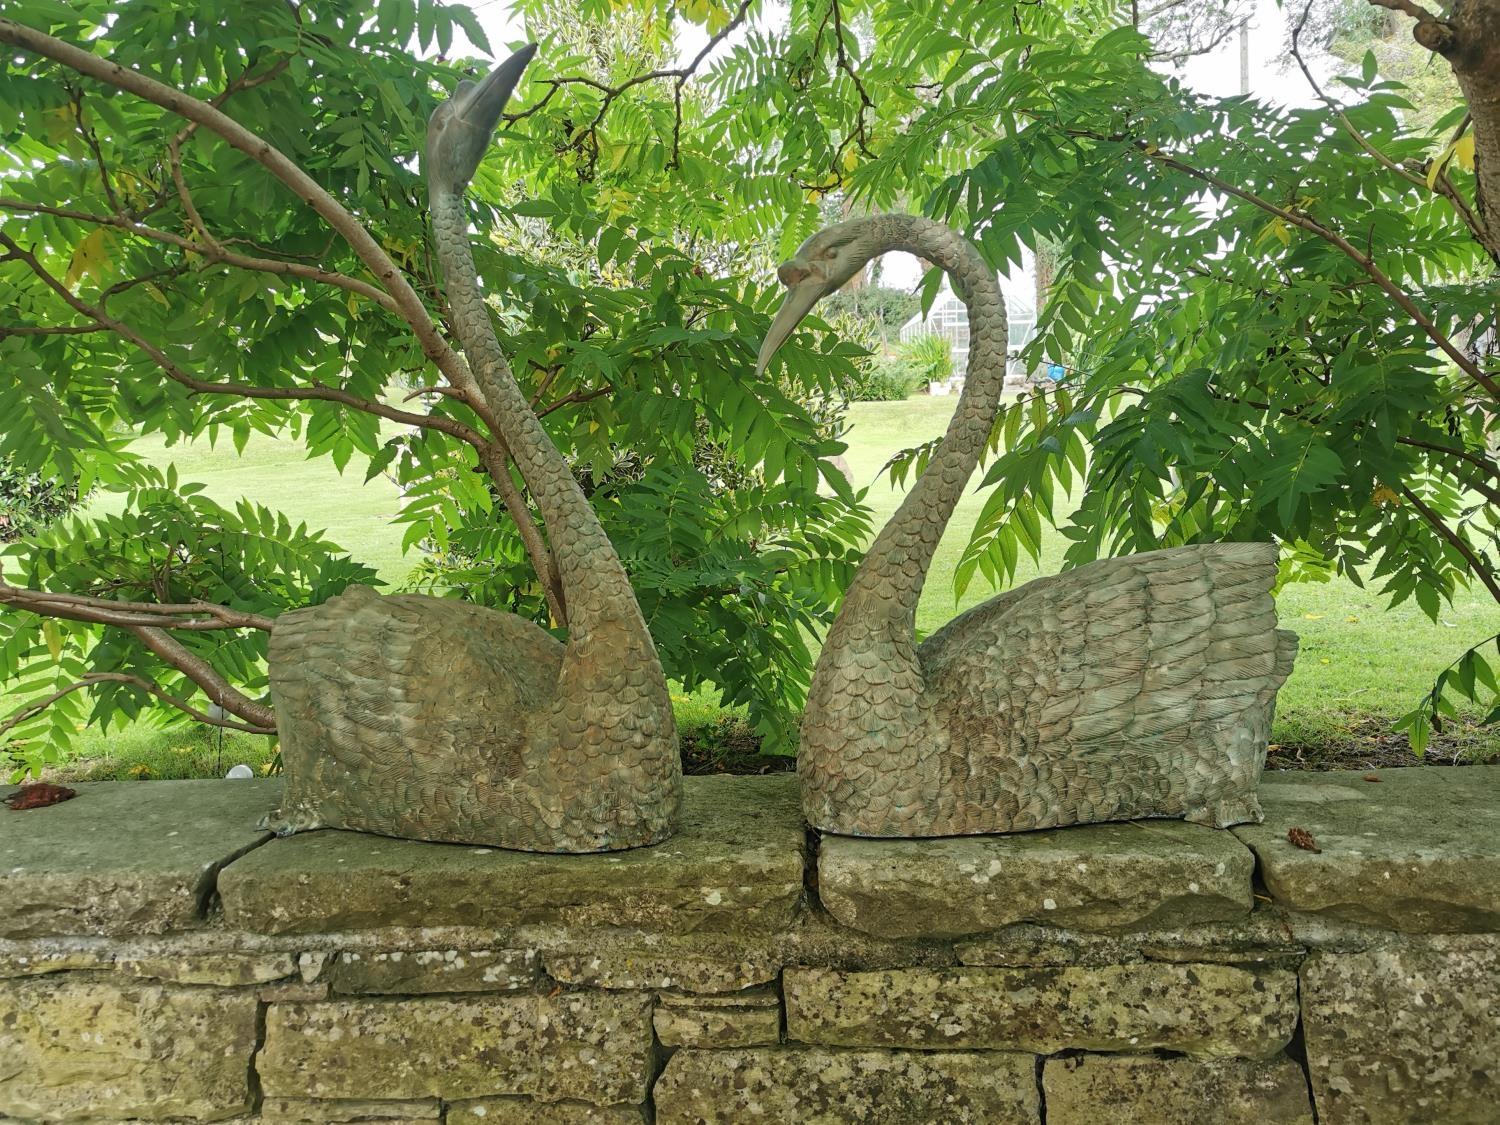 Set of exceptional quality bronze Swans - also can be used as water feature {90 cm H x 67 cm W x